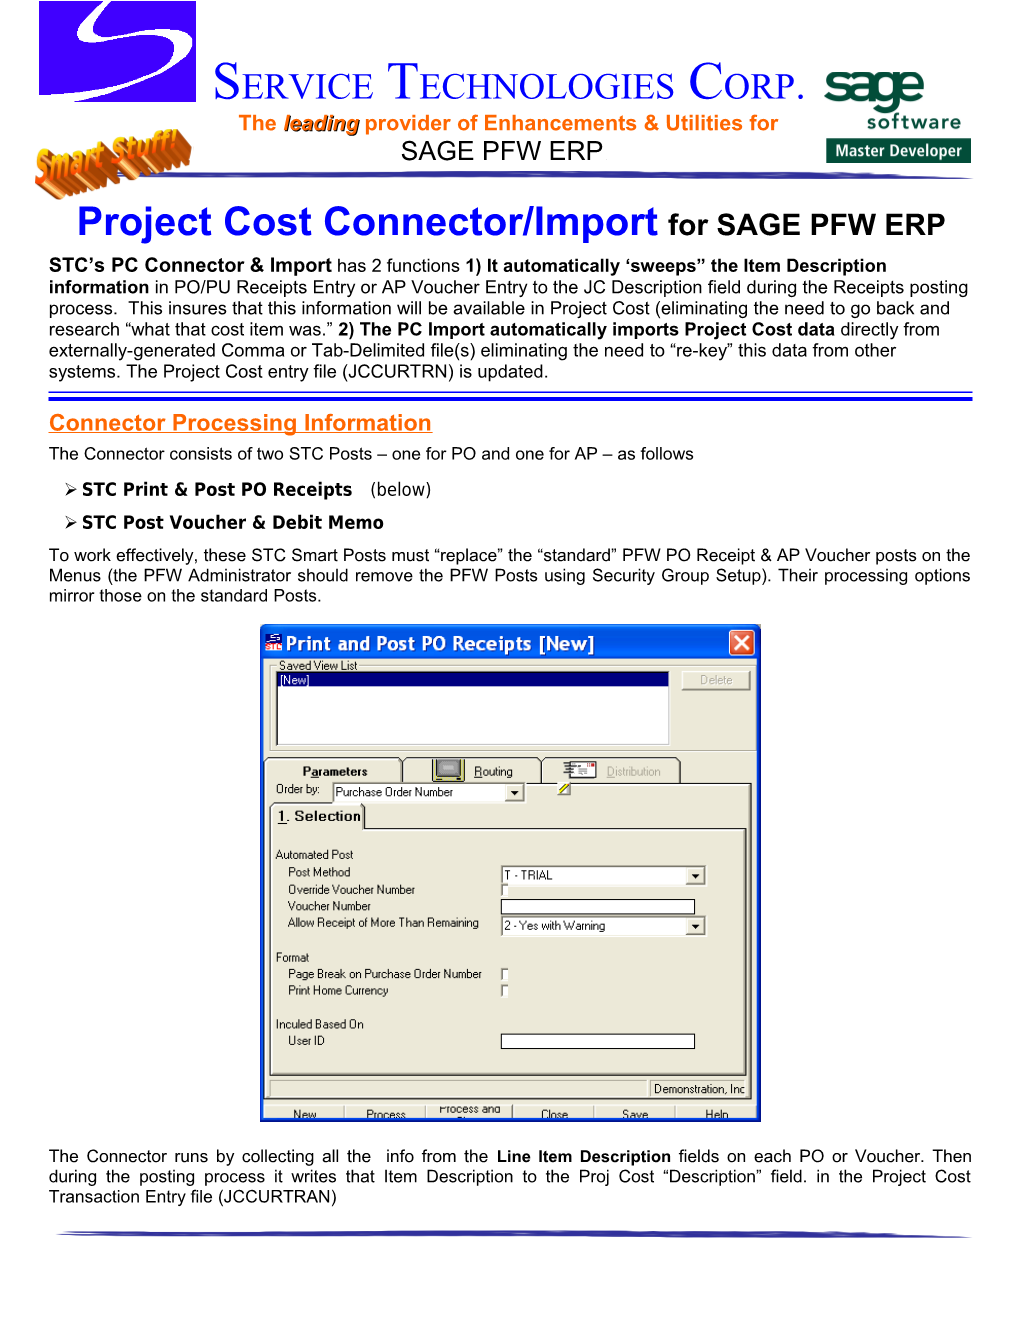 Project Cost Connector/Importfor SAGE PFW ERP